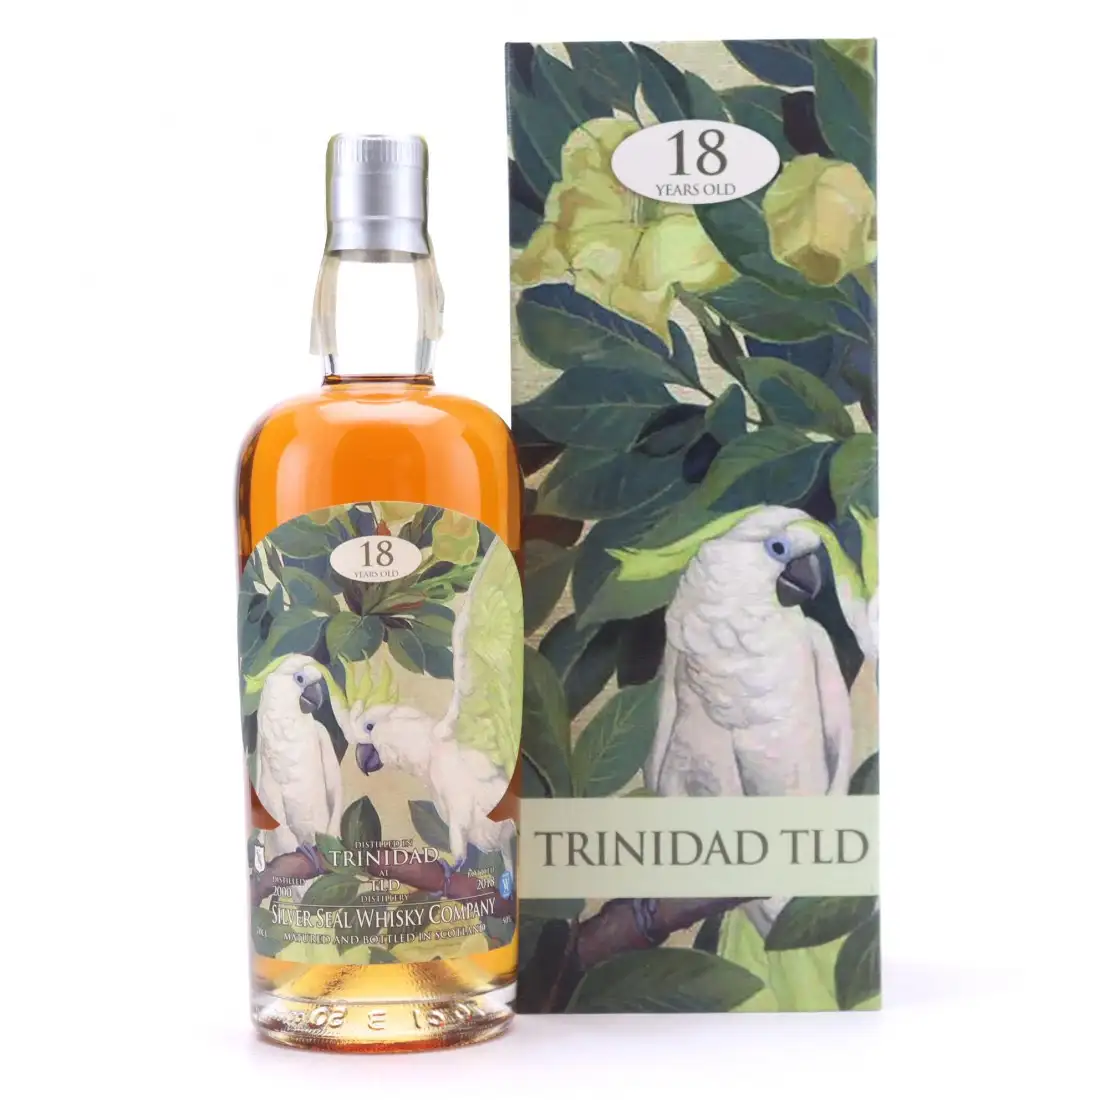 Image of the front of the bottle of the rum Trinidad